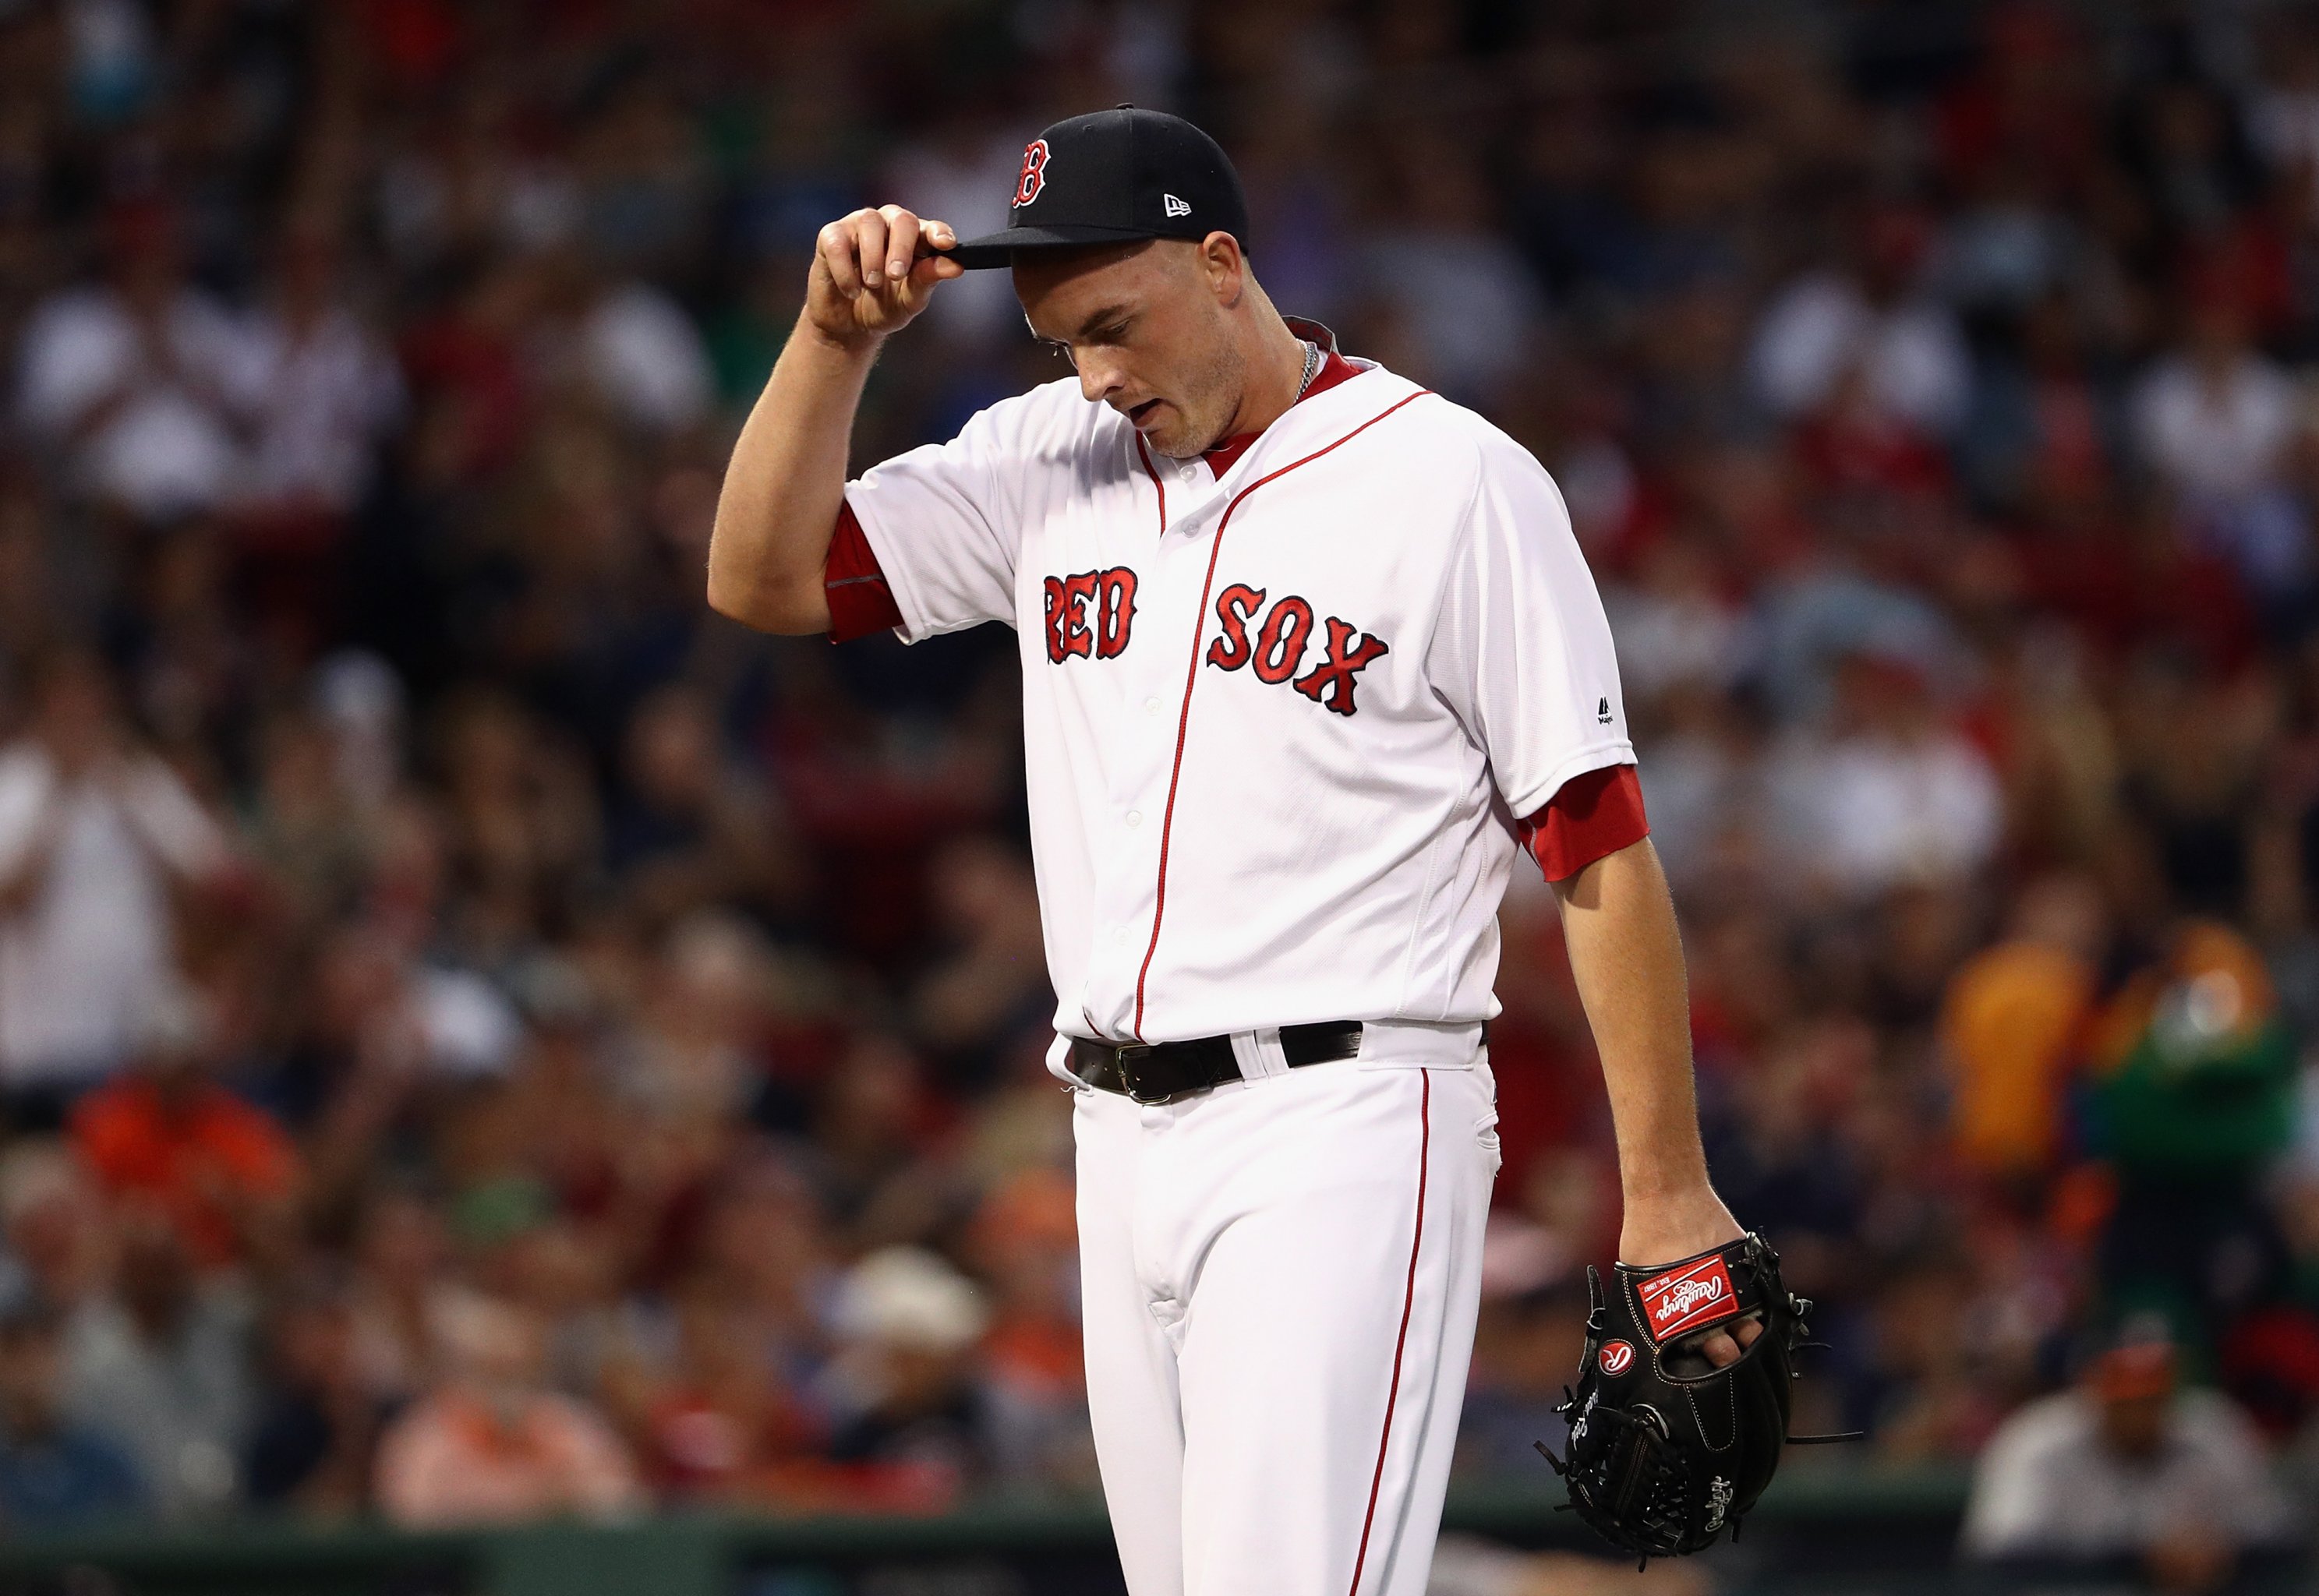 The Latest Frugality by the Red Sox Has a Ring to It